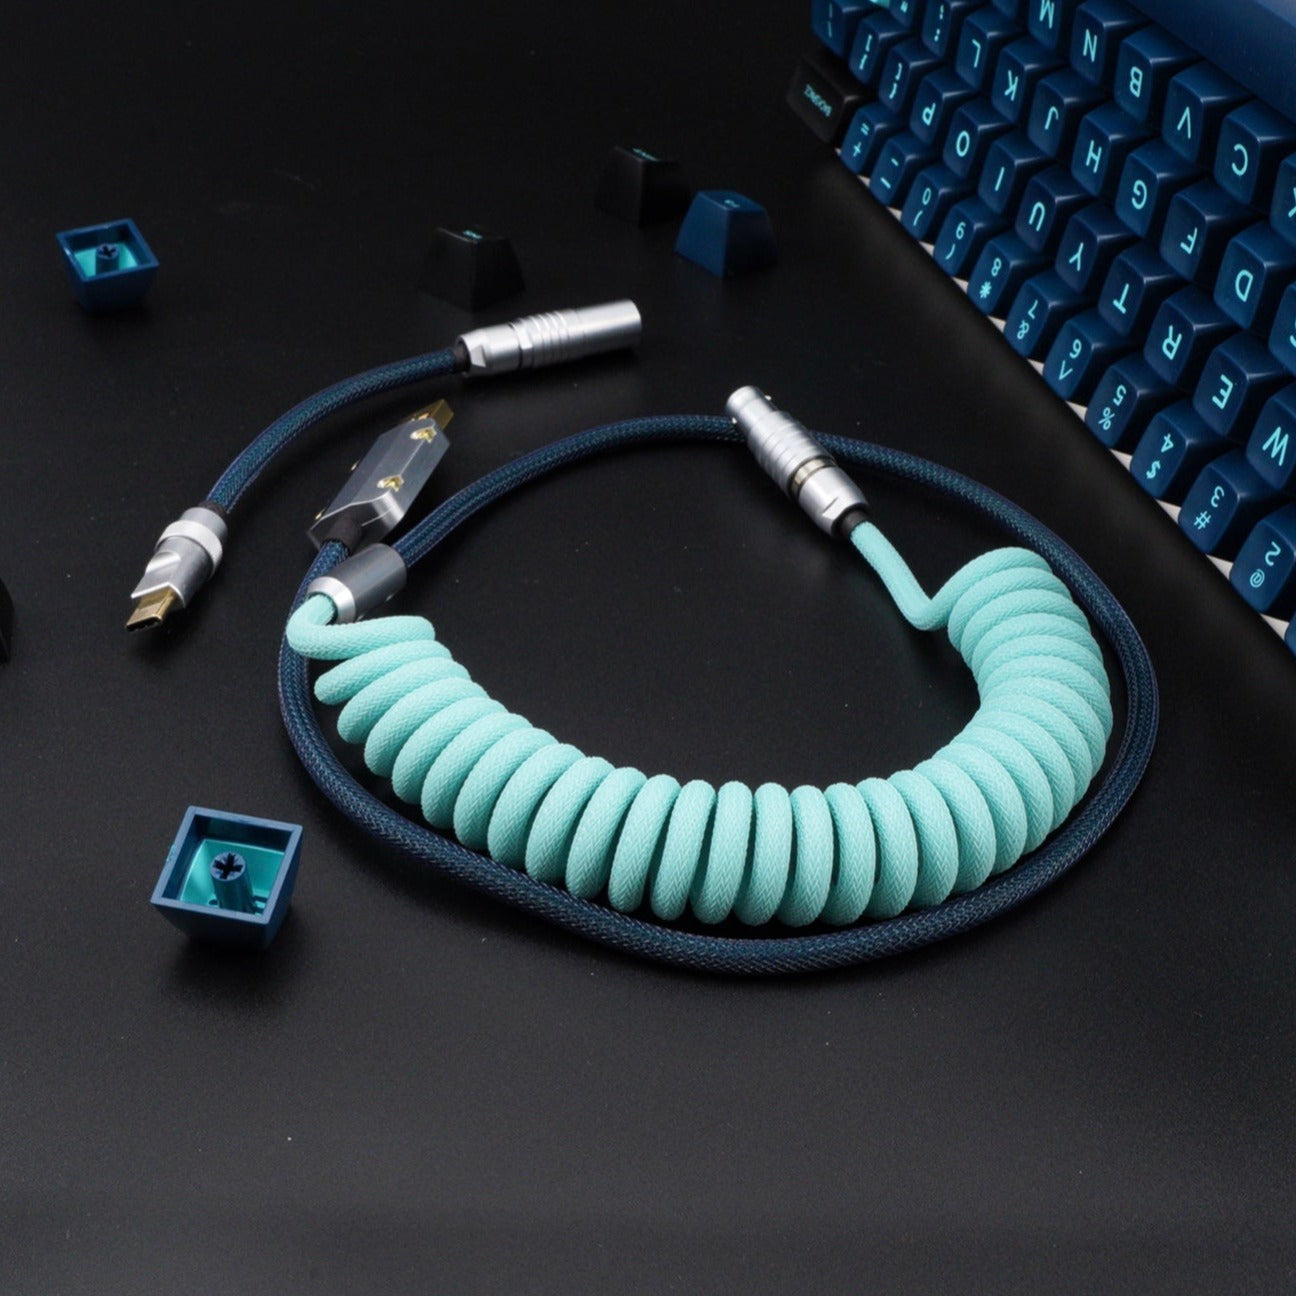 Sleeved Coiled Keyboard Aviator Cable, Lemo Style Connector - Teal/Dark Blue